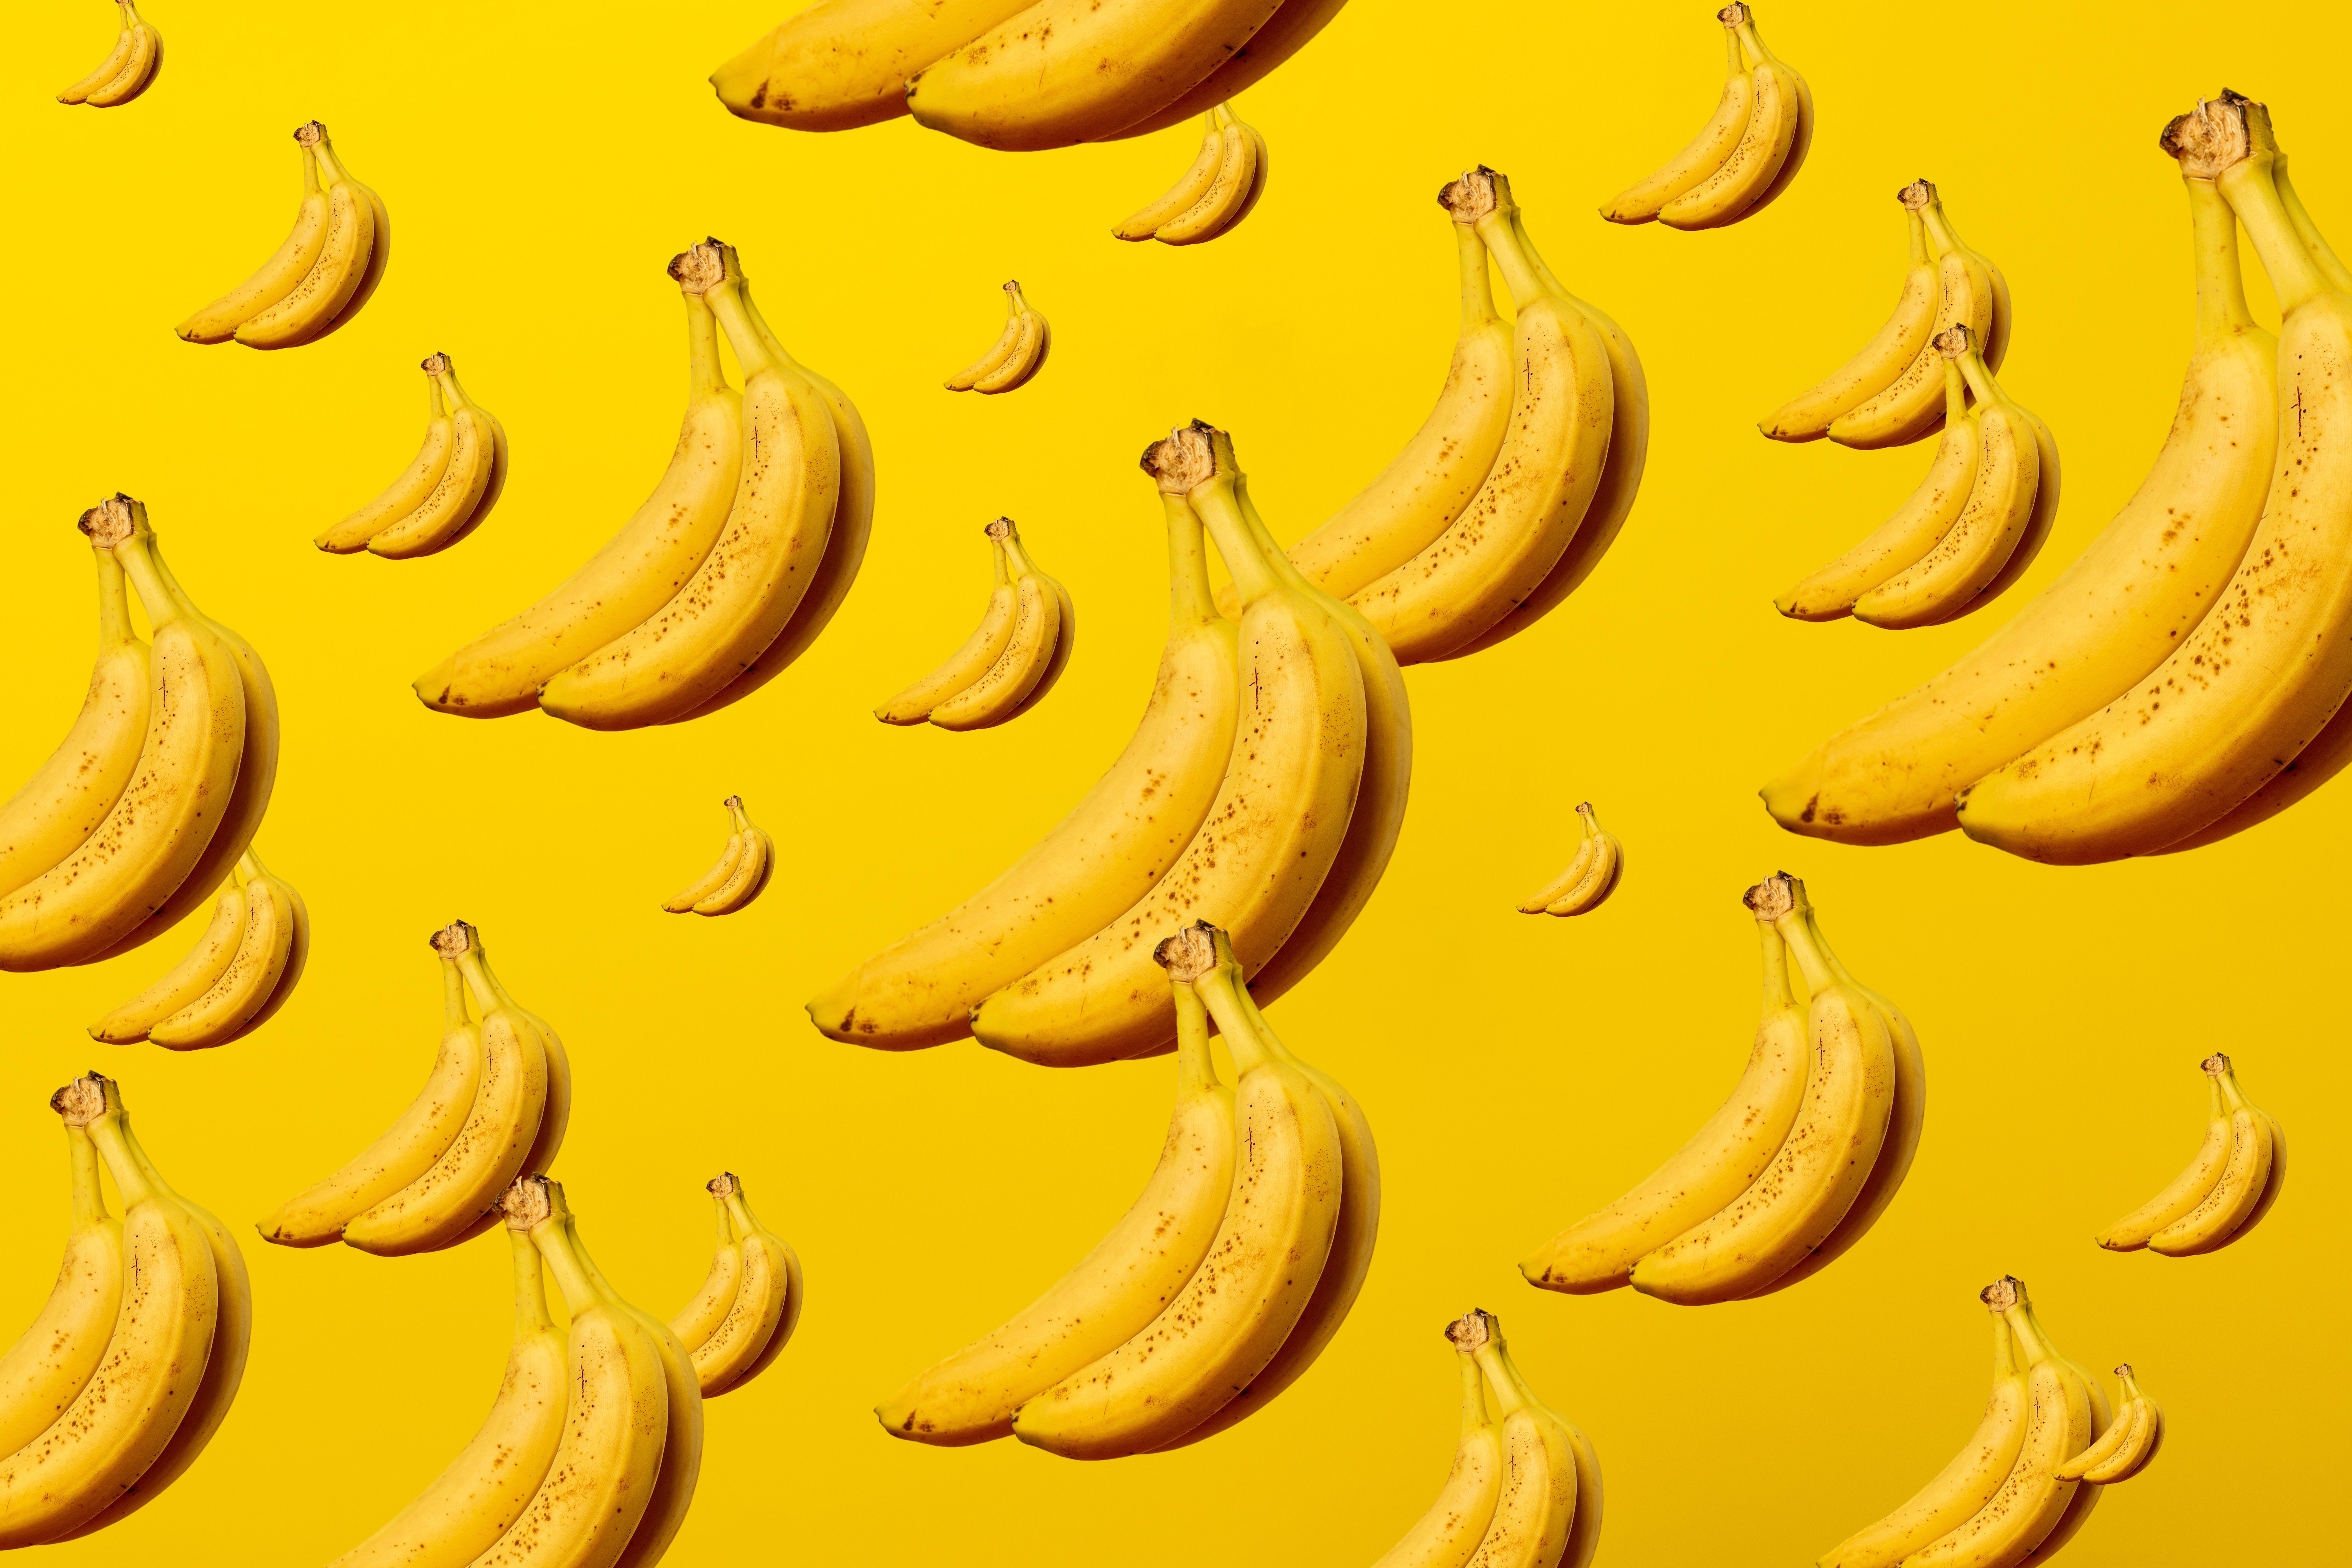 Banana Crew will come and tell all about their newest logo and their brand standards.